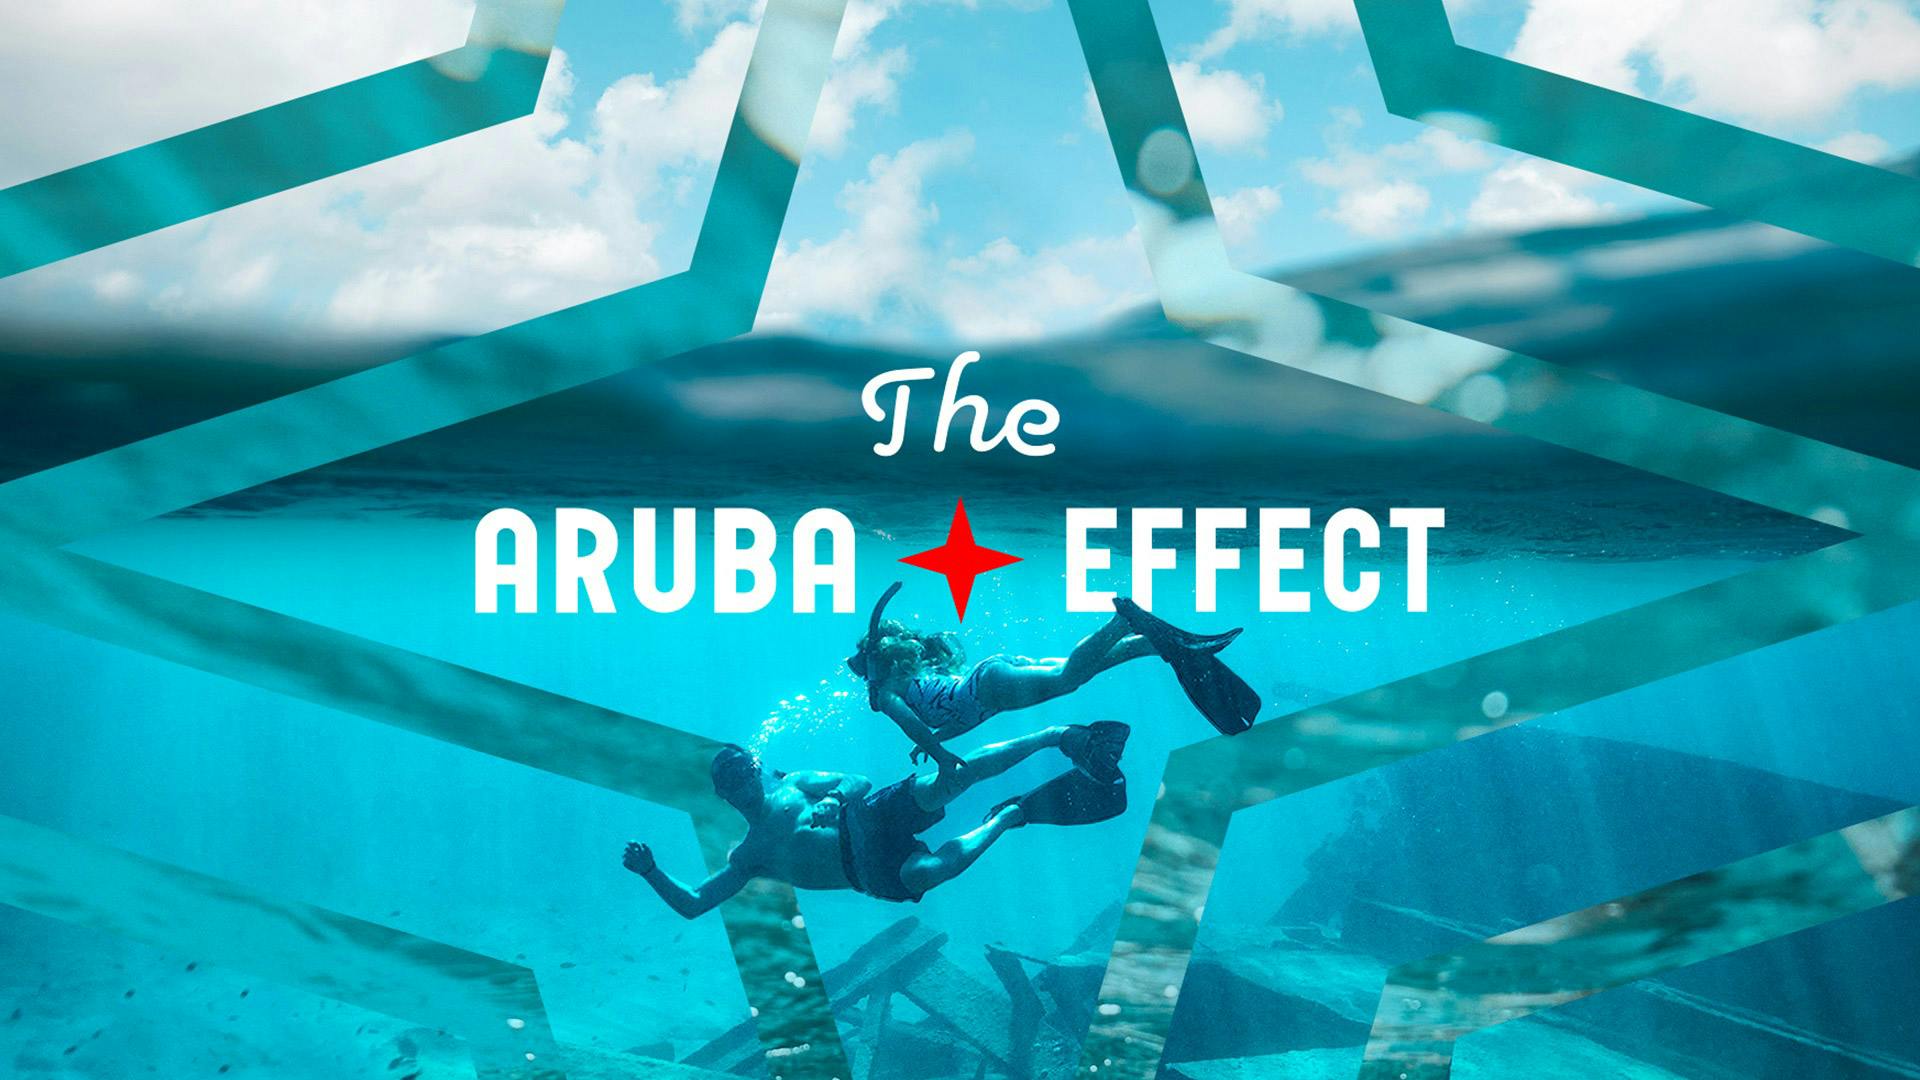 Big Village Positions Aruba as the #1 Exporter of Happiness in New Creative Campaign for Aruba Tourism Authority (ATA)